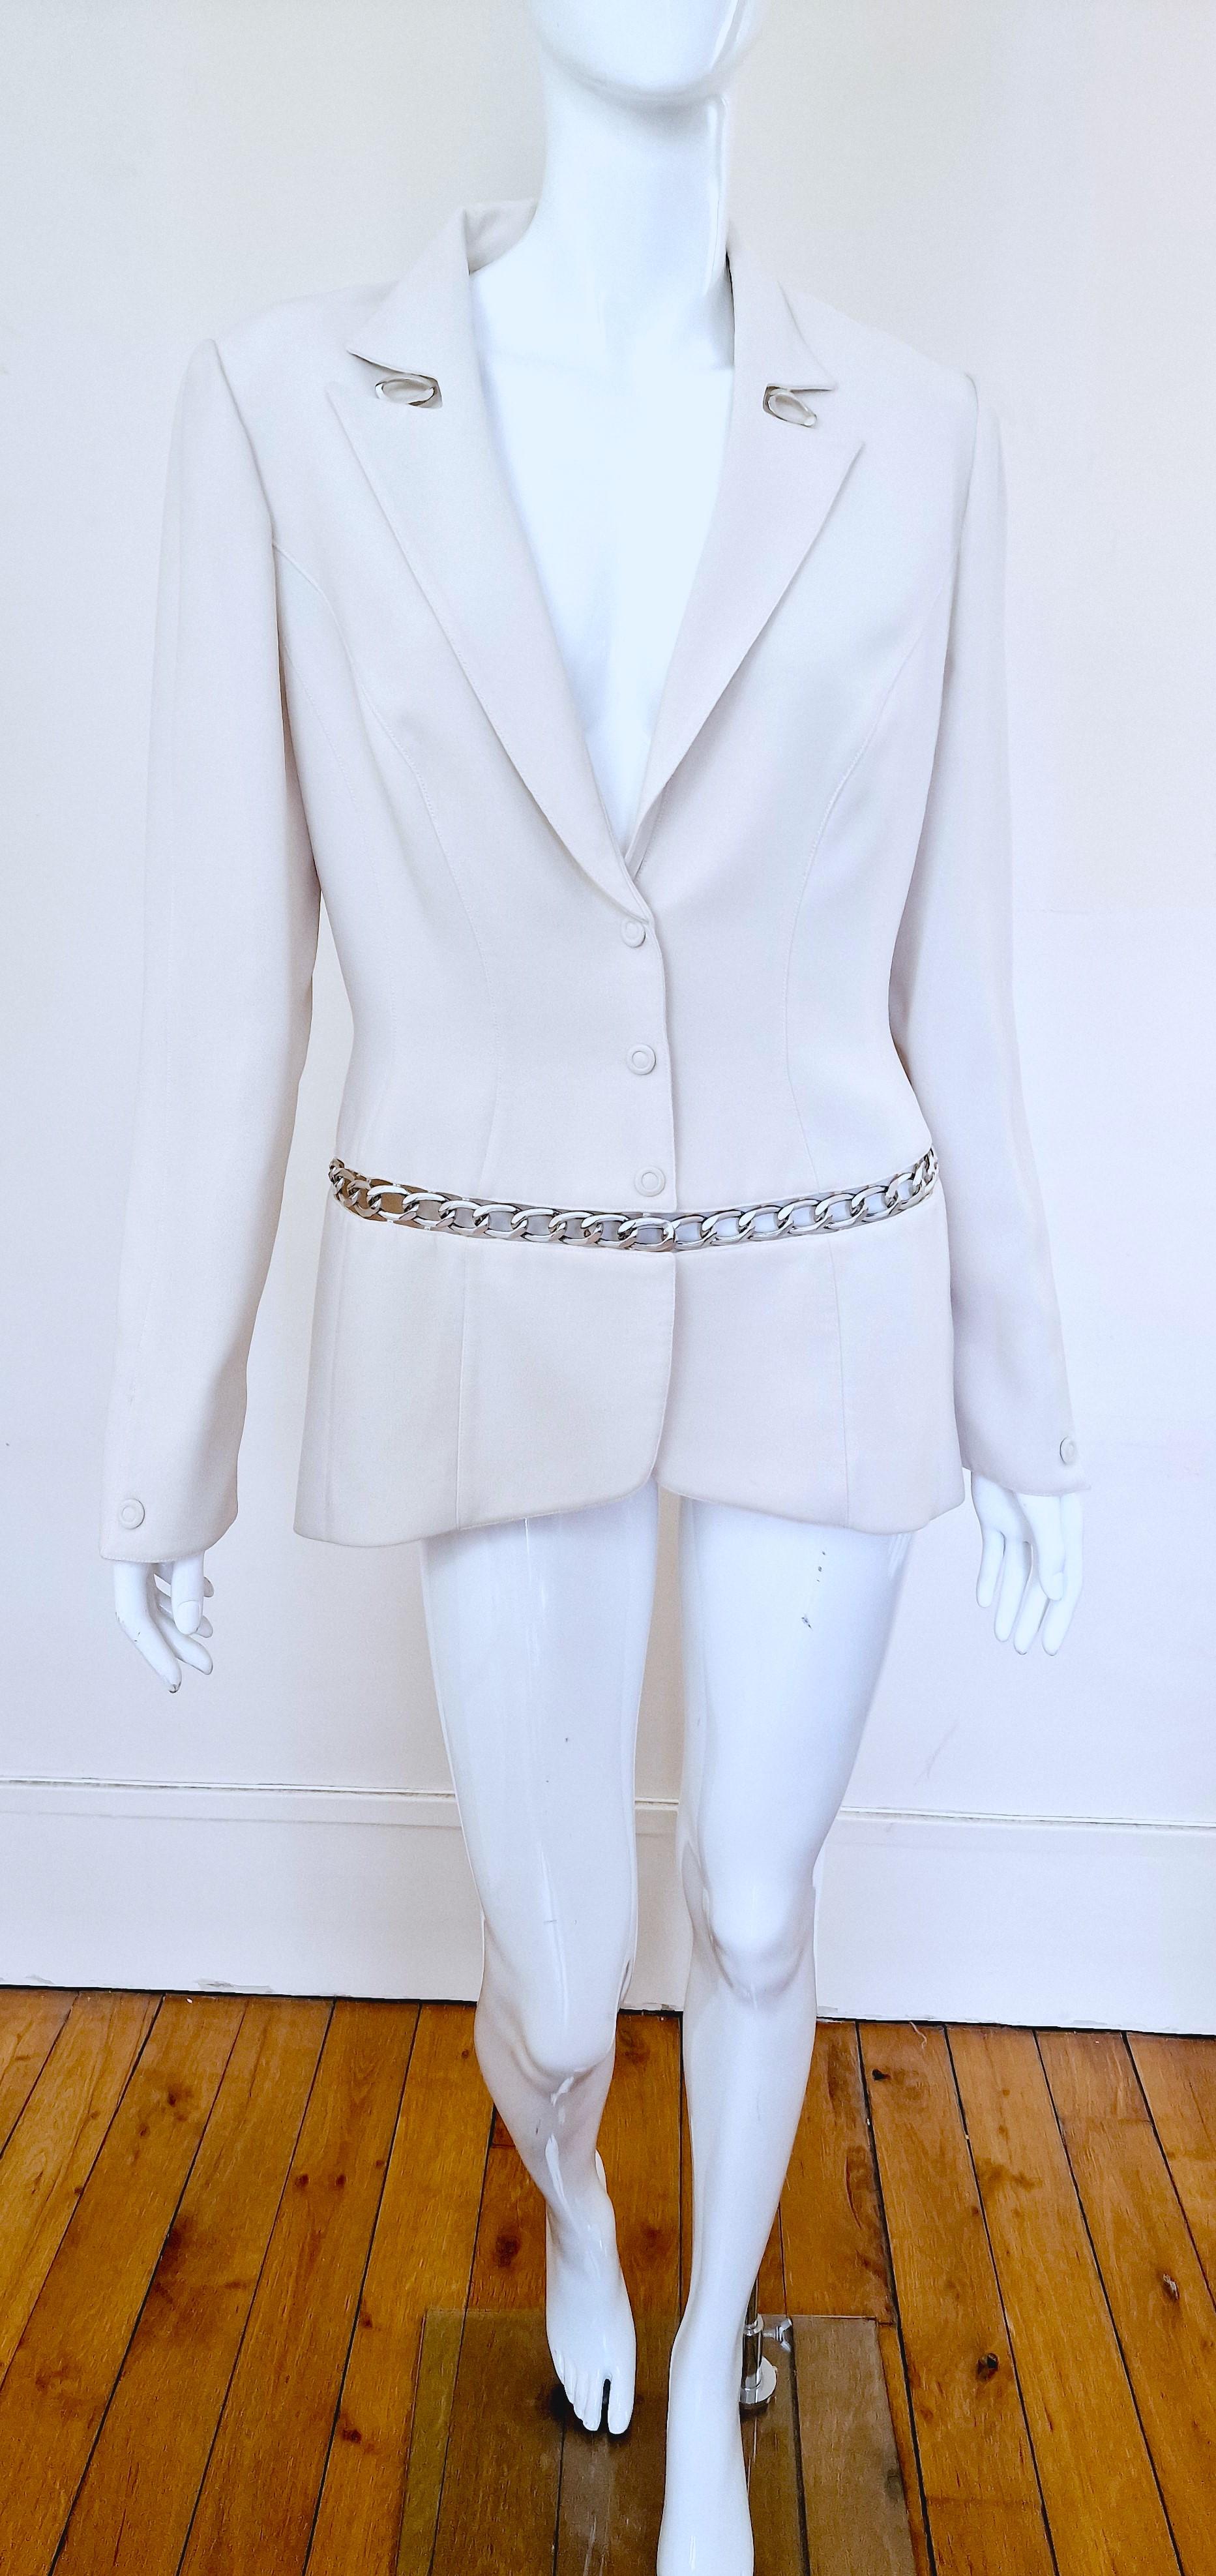 Thierry Mugler Chain Runway Evening Couture White Wasp Waist Large Blazer Jacket For Sale 6